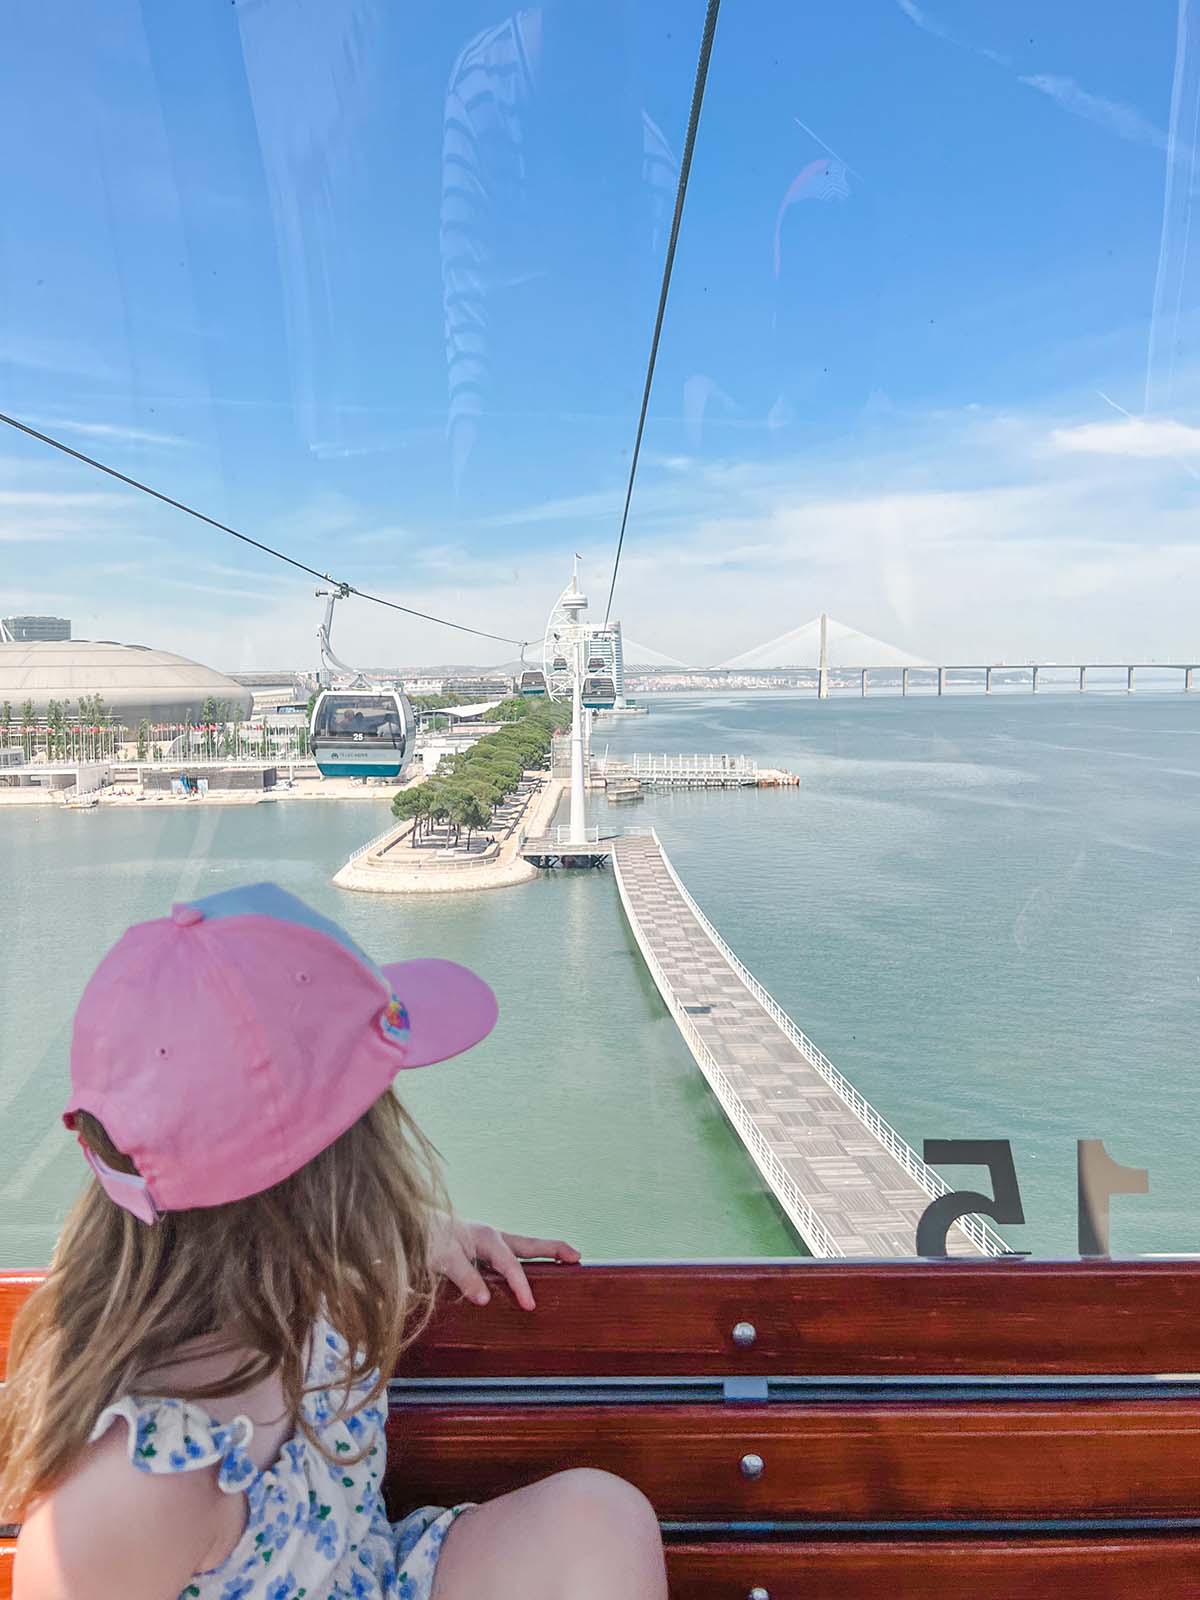 Riding the cable car in Lisbon.